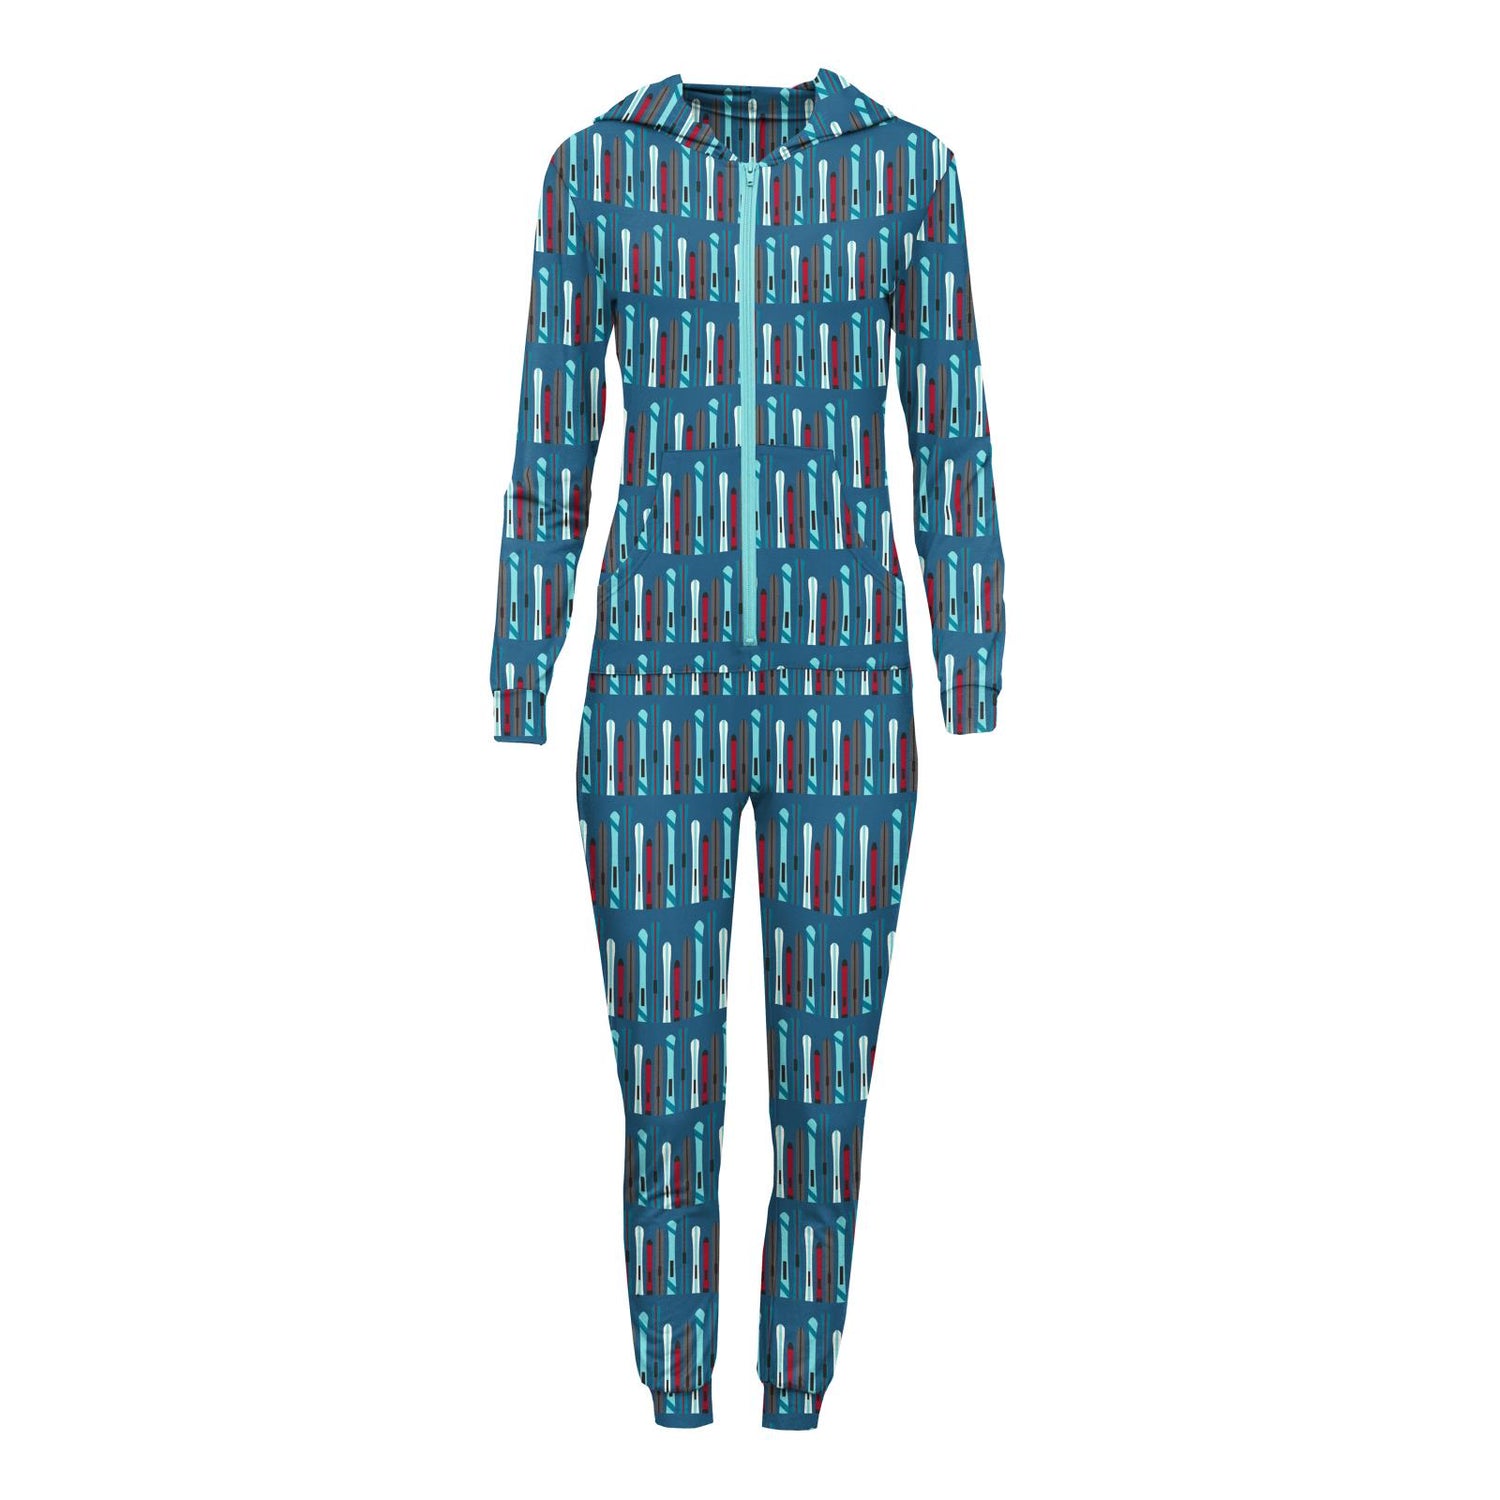 Women's Print Long Sleeve Jumpsuit with Hood in Twilight Skis